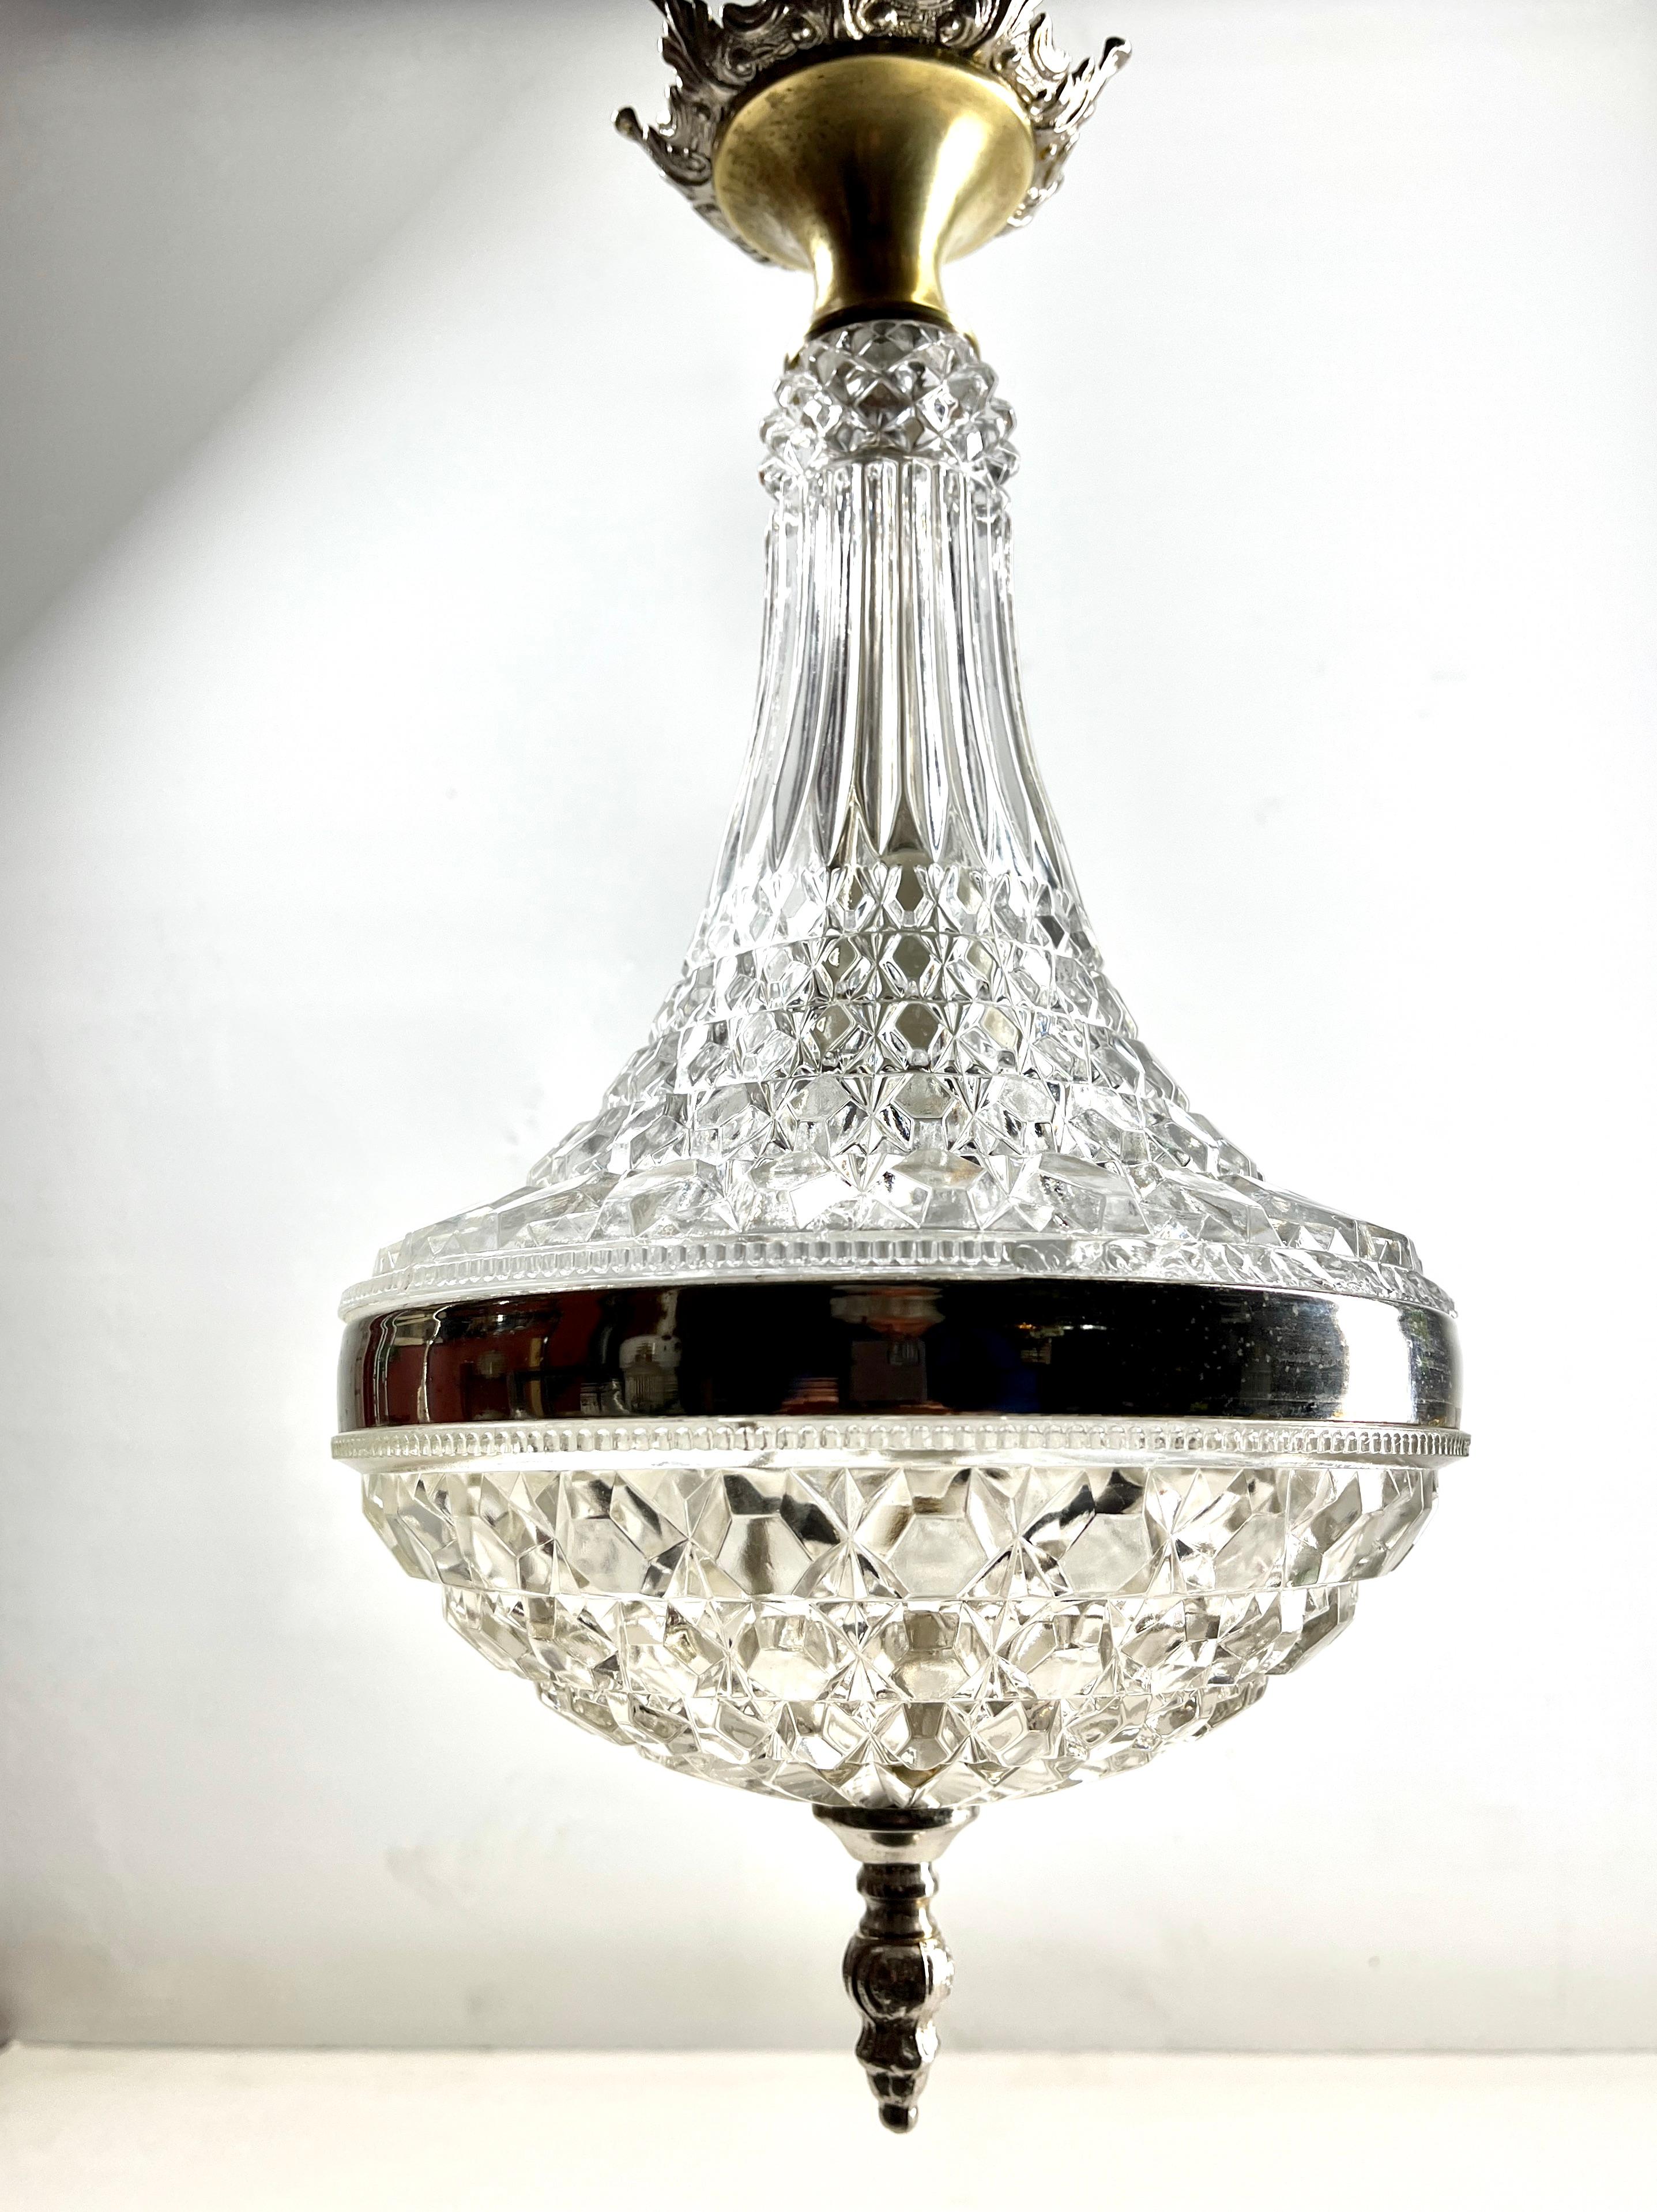 Art Deco Halophane Ceiling Lamp, Scailmont Belgium Glass Shade, 1930s

Photography fails to capture the simple elegant illumination provided by this lamp.

As service: We can adjust the lamp height for you in advance if needed. 

Fitting